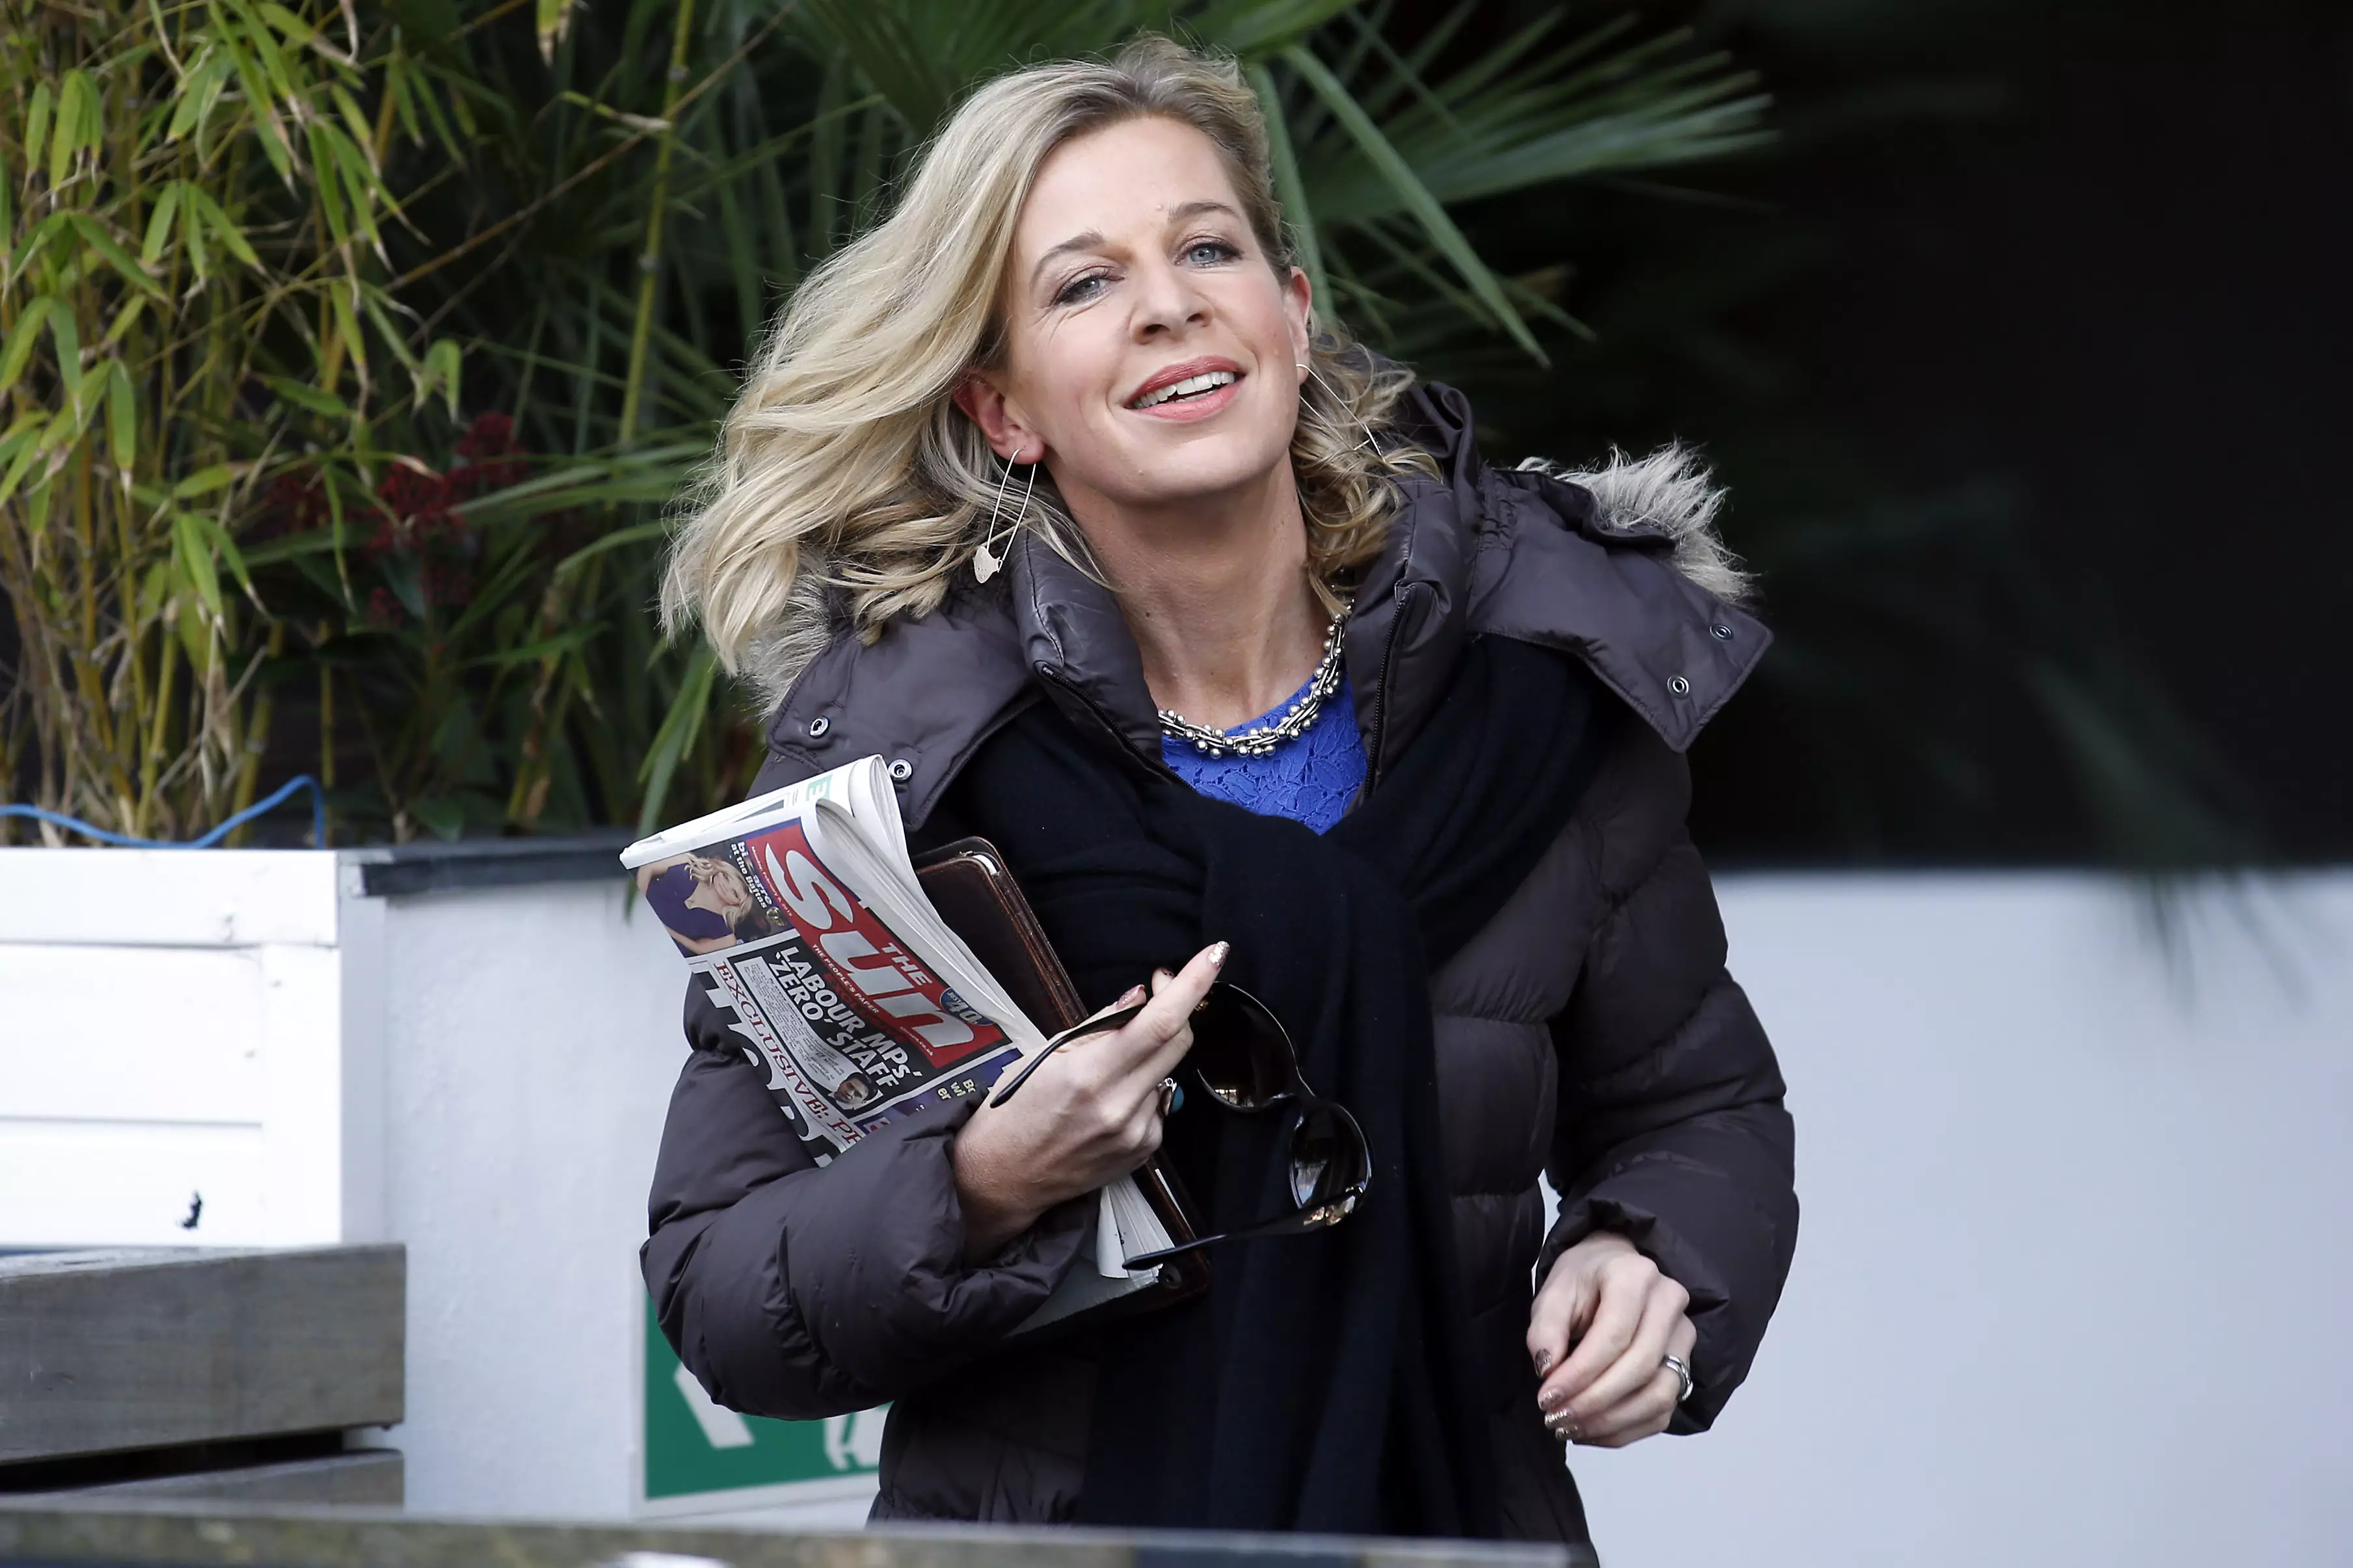 Lad's Hoax Story Leads To Katie Hopkins Embarrassing Herself Live On Air